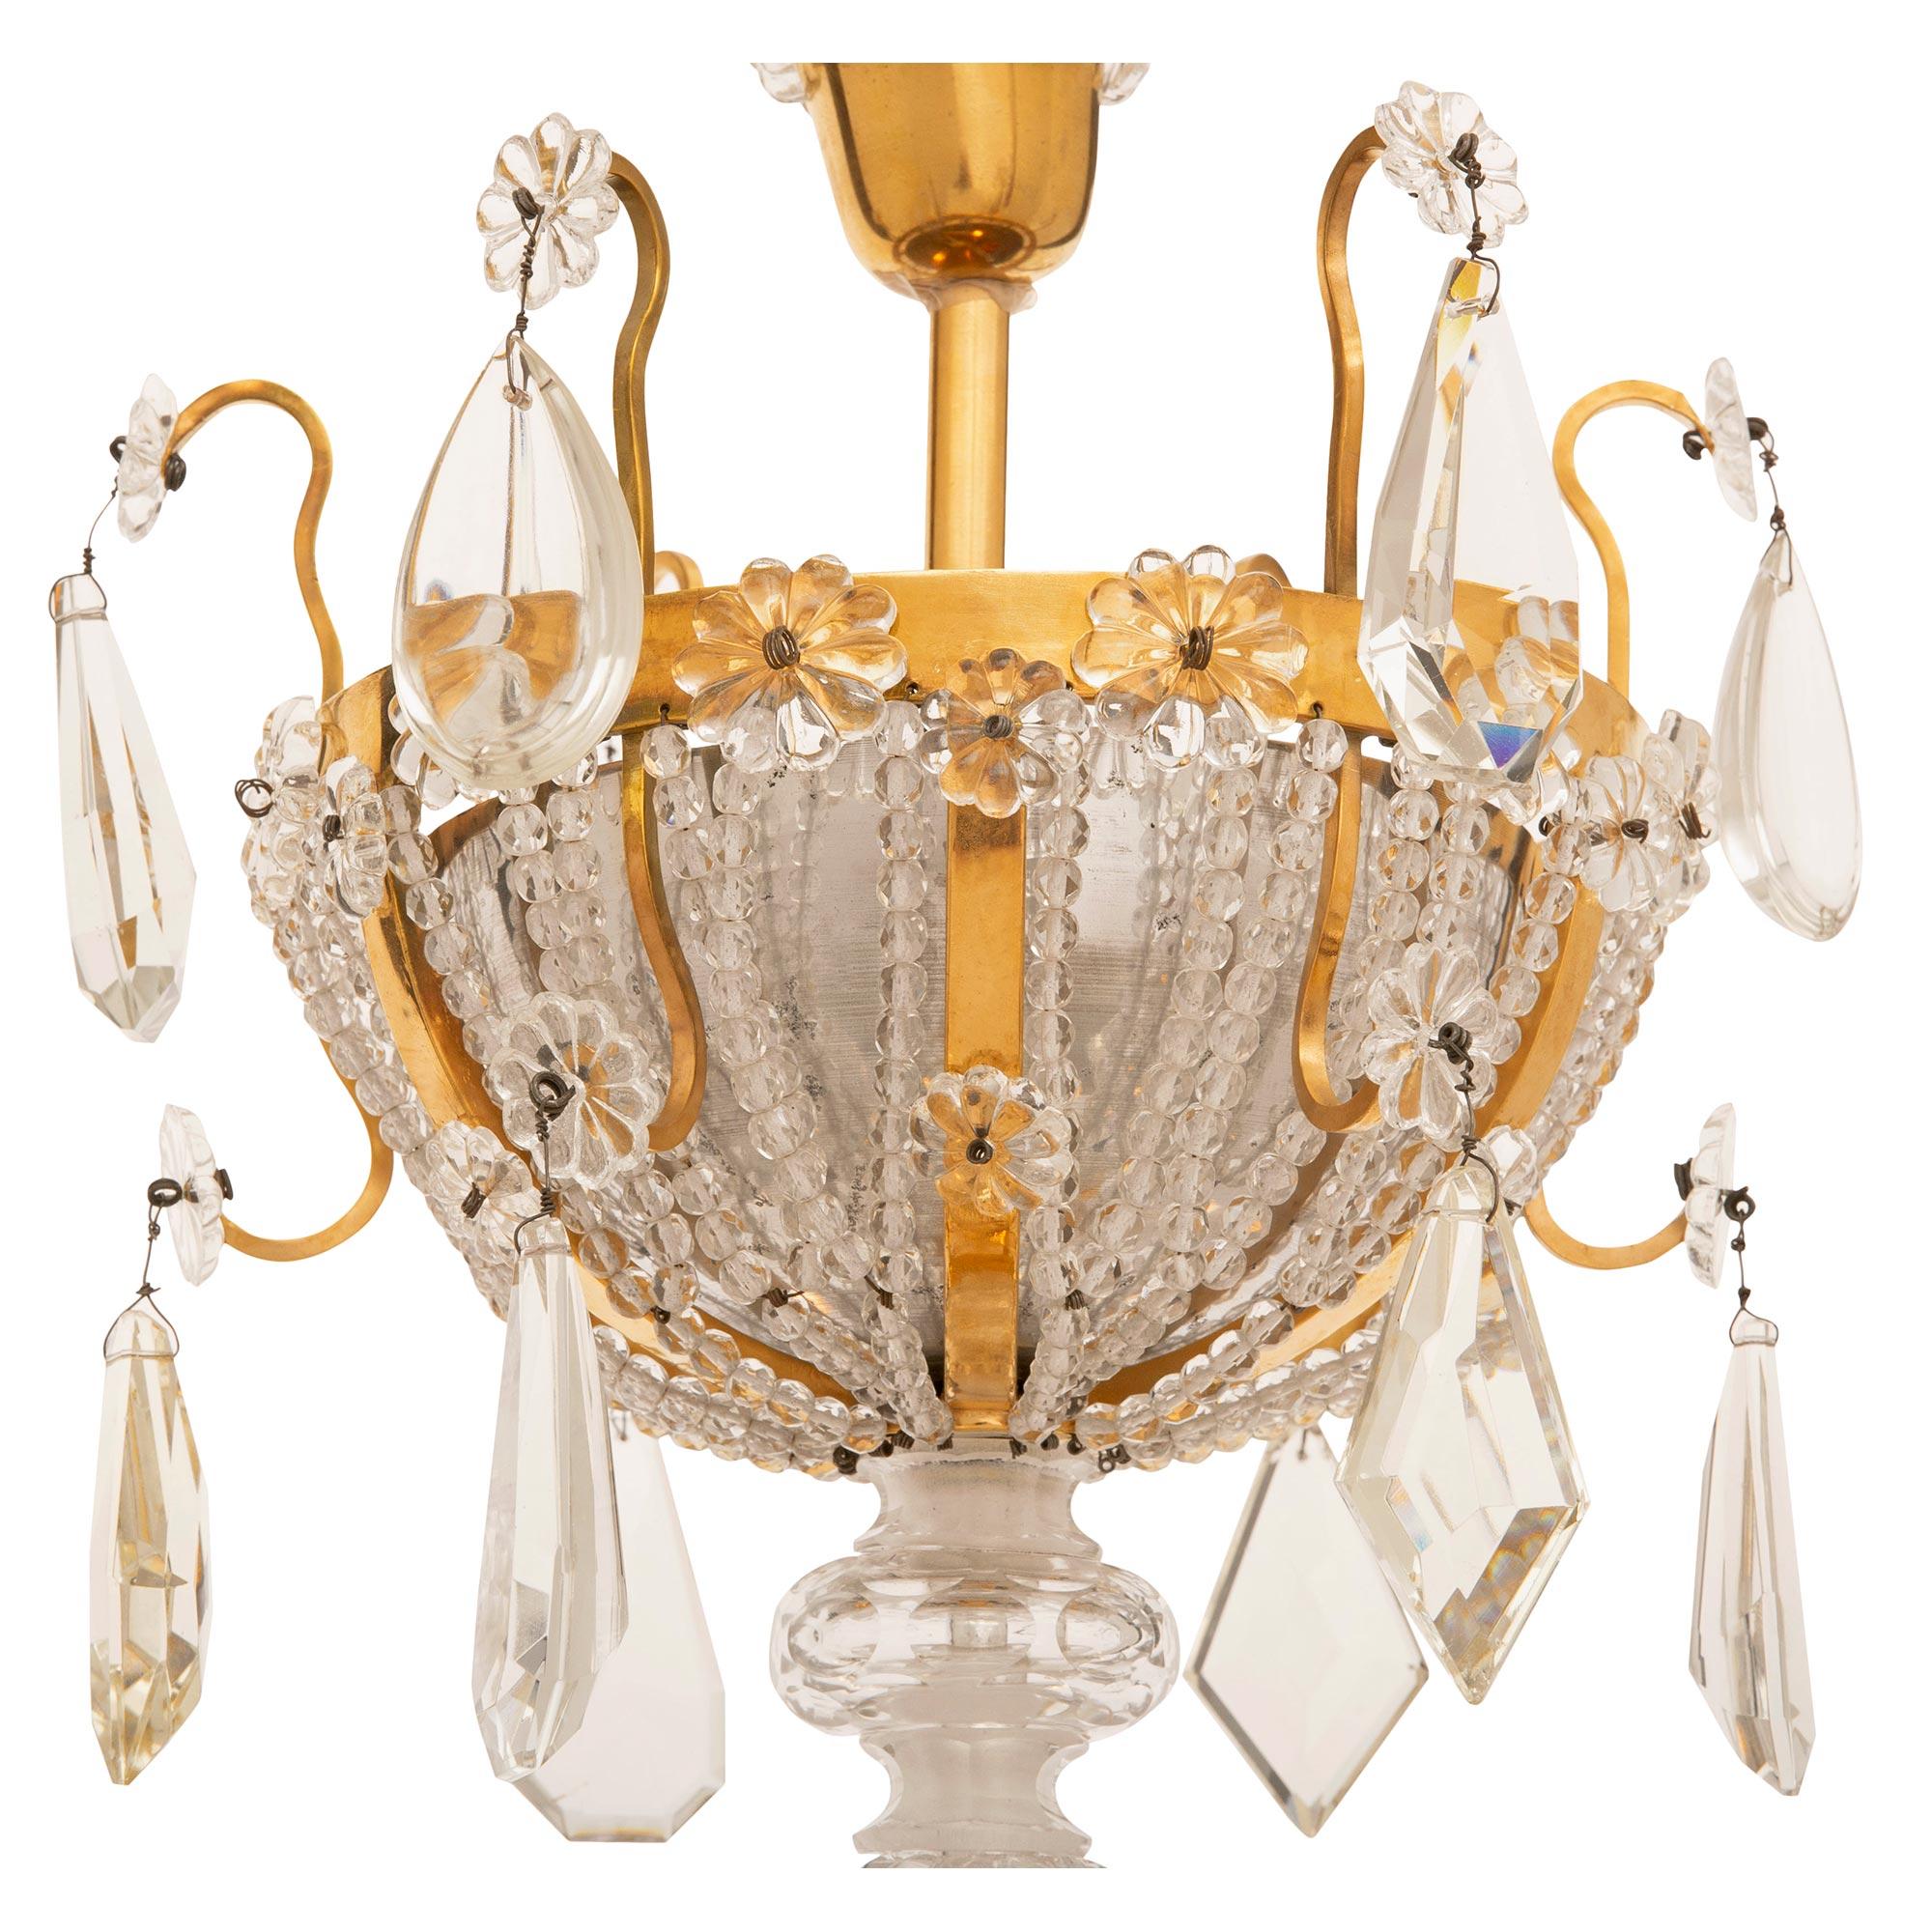 French 19th Century Louis XVI St. Bronze, Ormolu, and Crystal Chandelier In Good Condition For Sale In West Palm Beach, FL